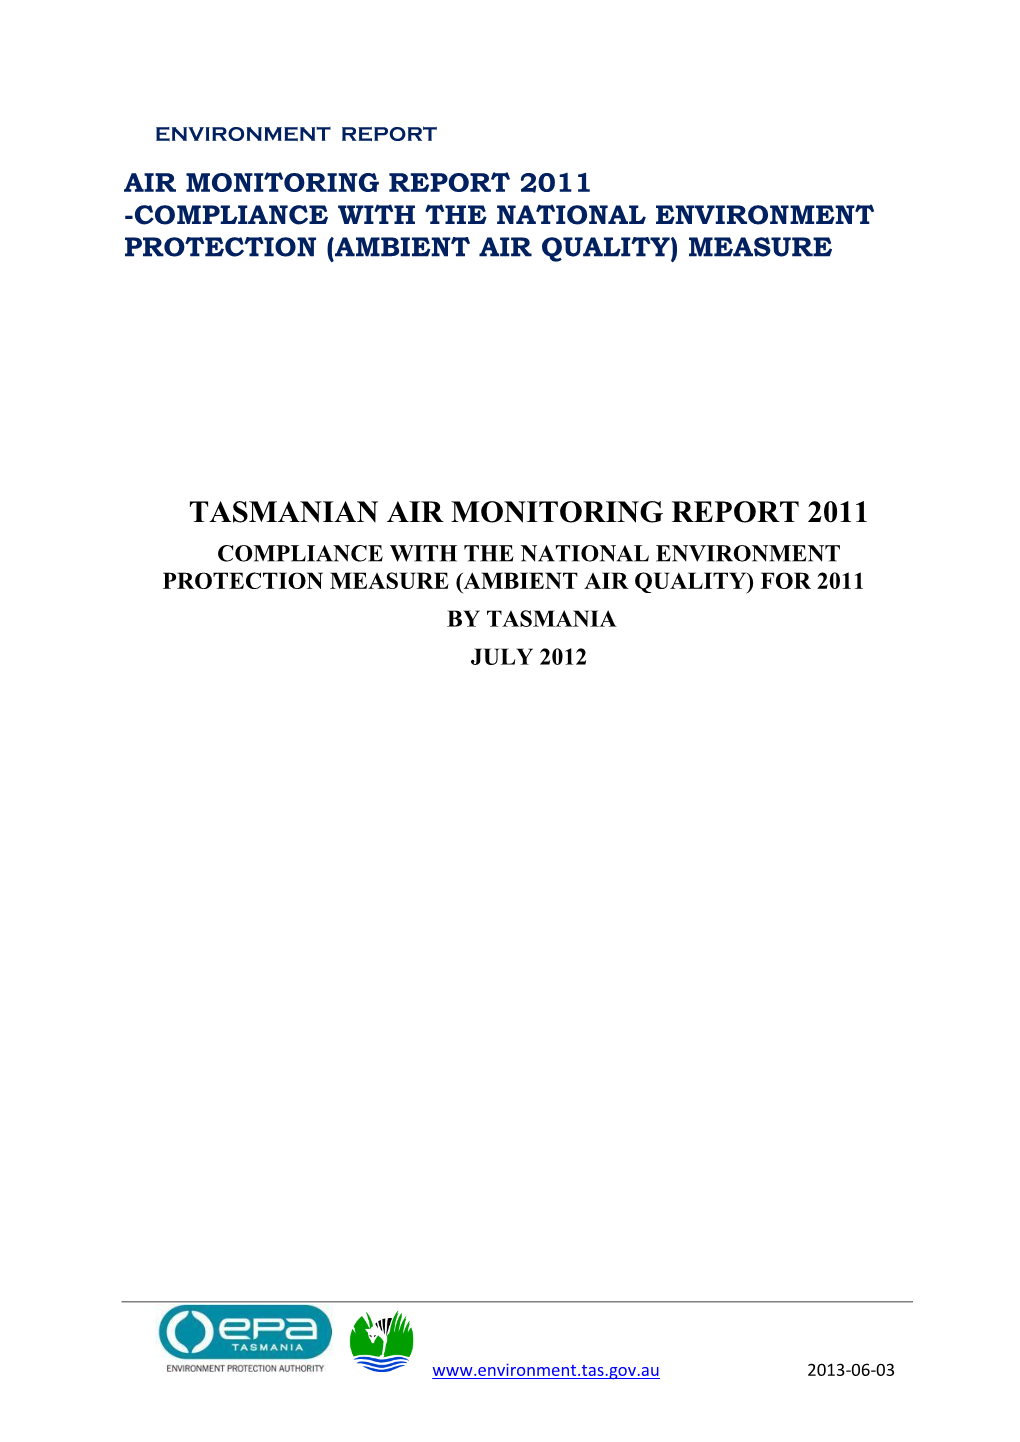 Tasmanian Air Monitoring Report 2011 Compliance with the National Environment Protection Measure (Ambient Air Quality) for 2011 by Tasmania July 2012